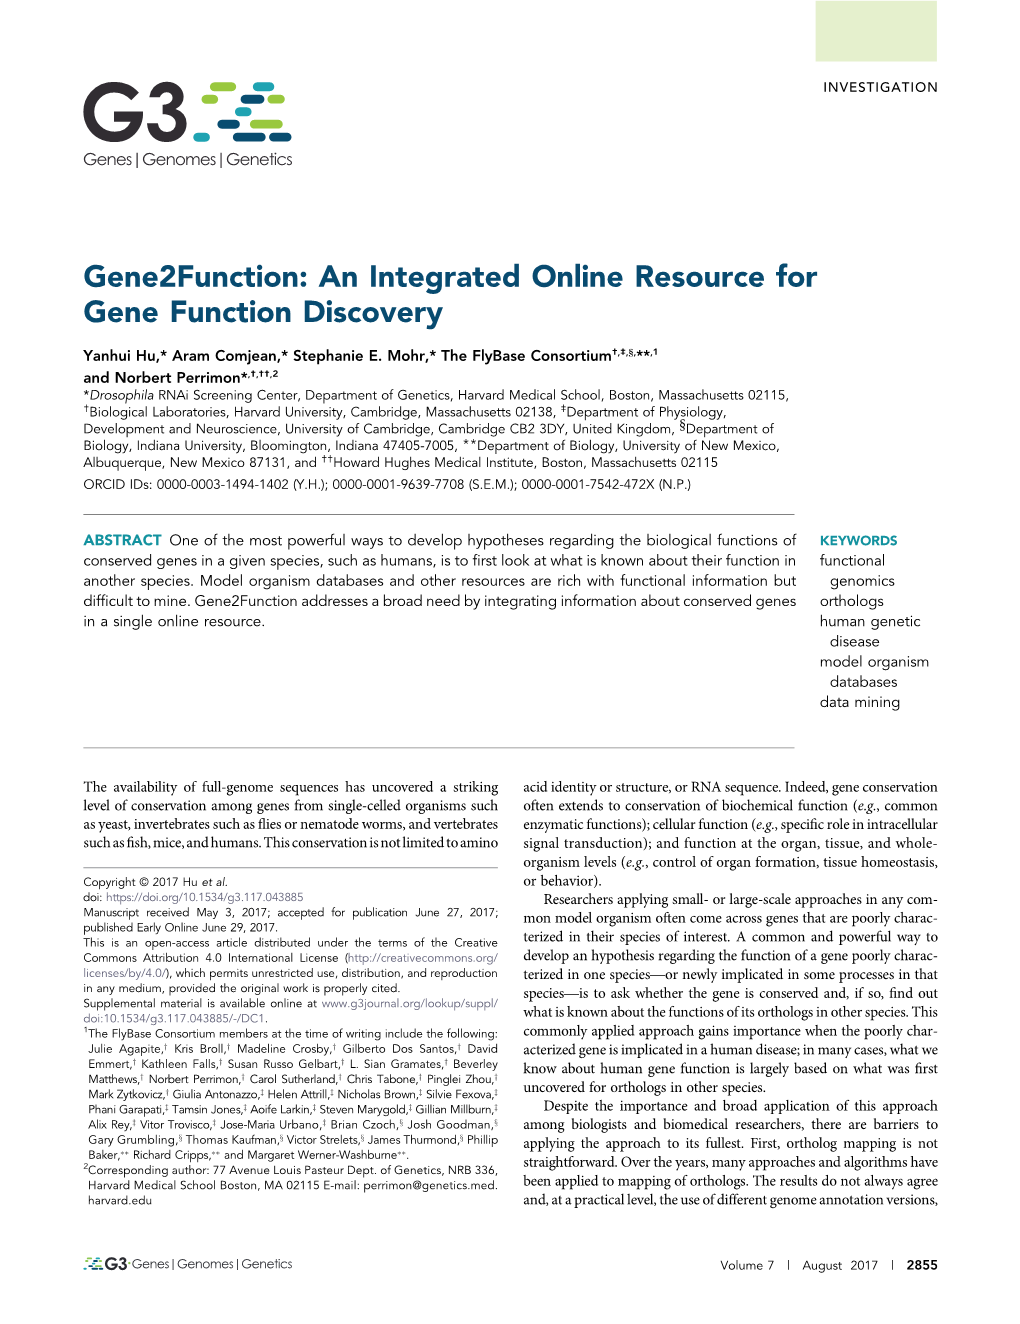 An Integrated Online Resource for Gene Function Discovery